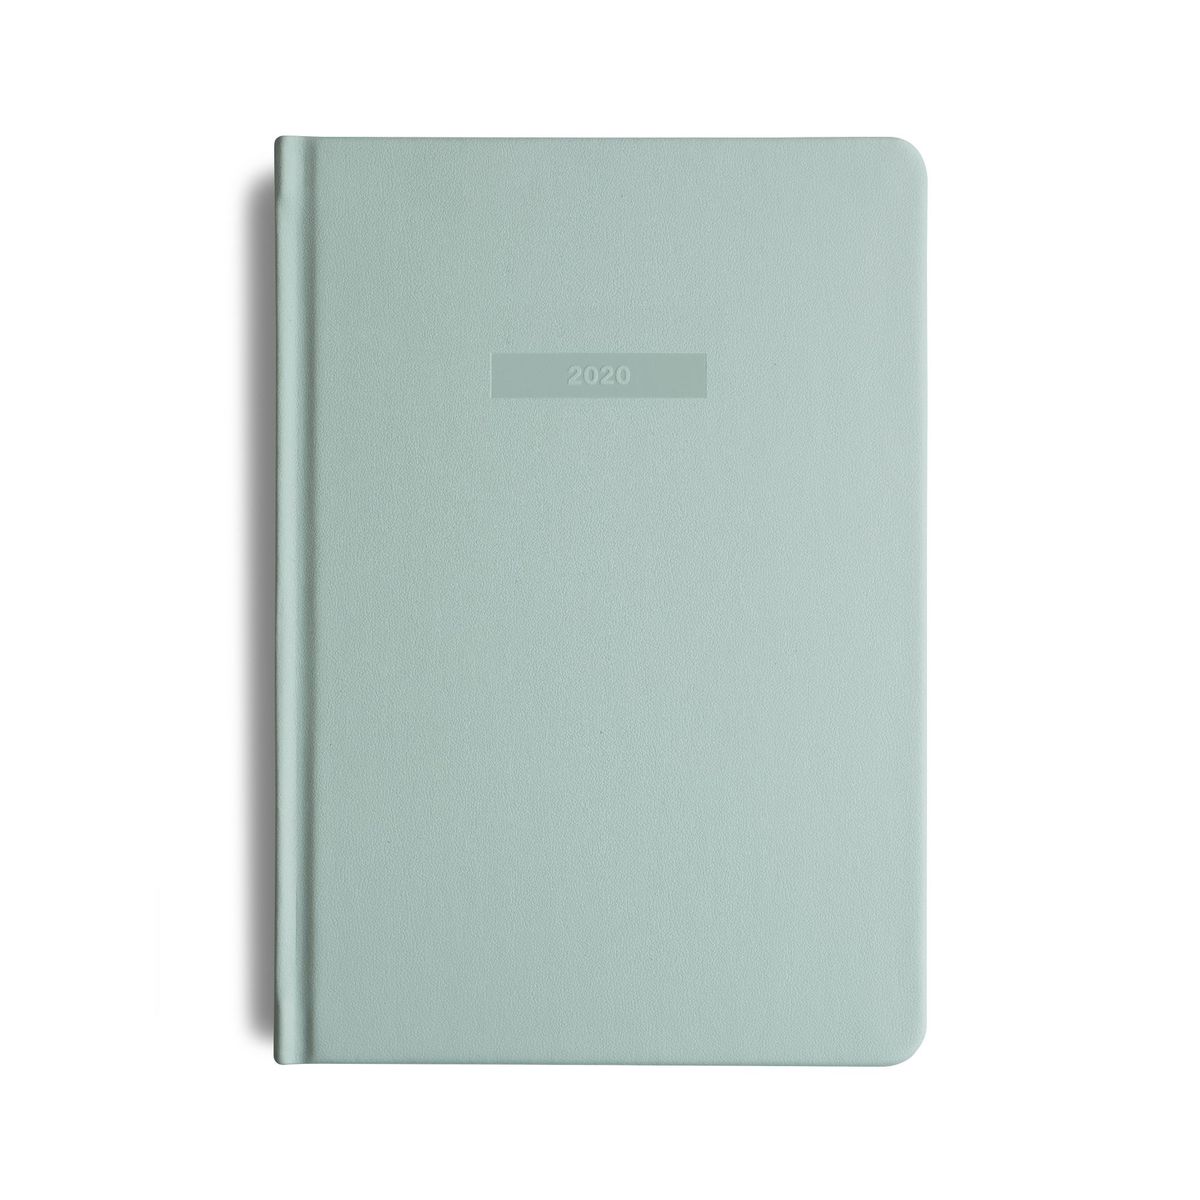 Migoals Hard Cover Diary 2020 Mint A5